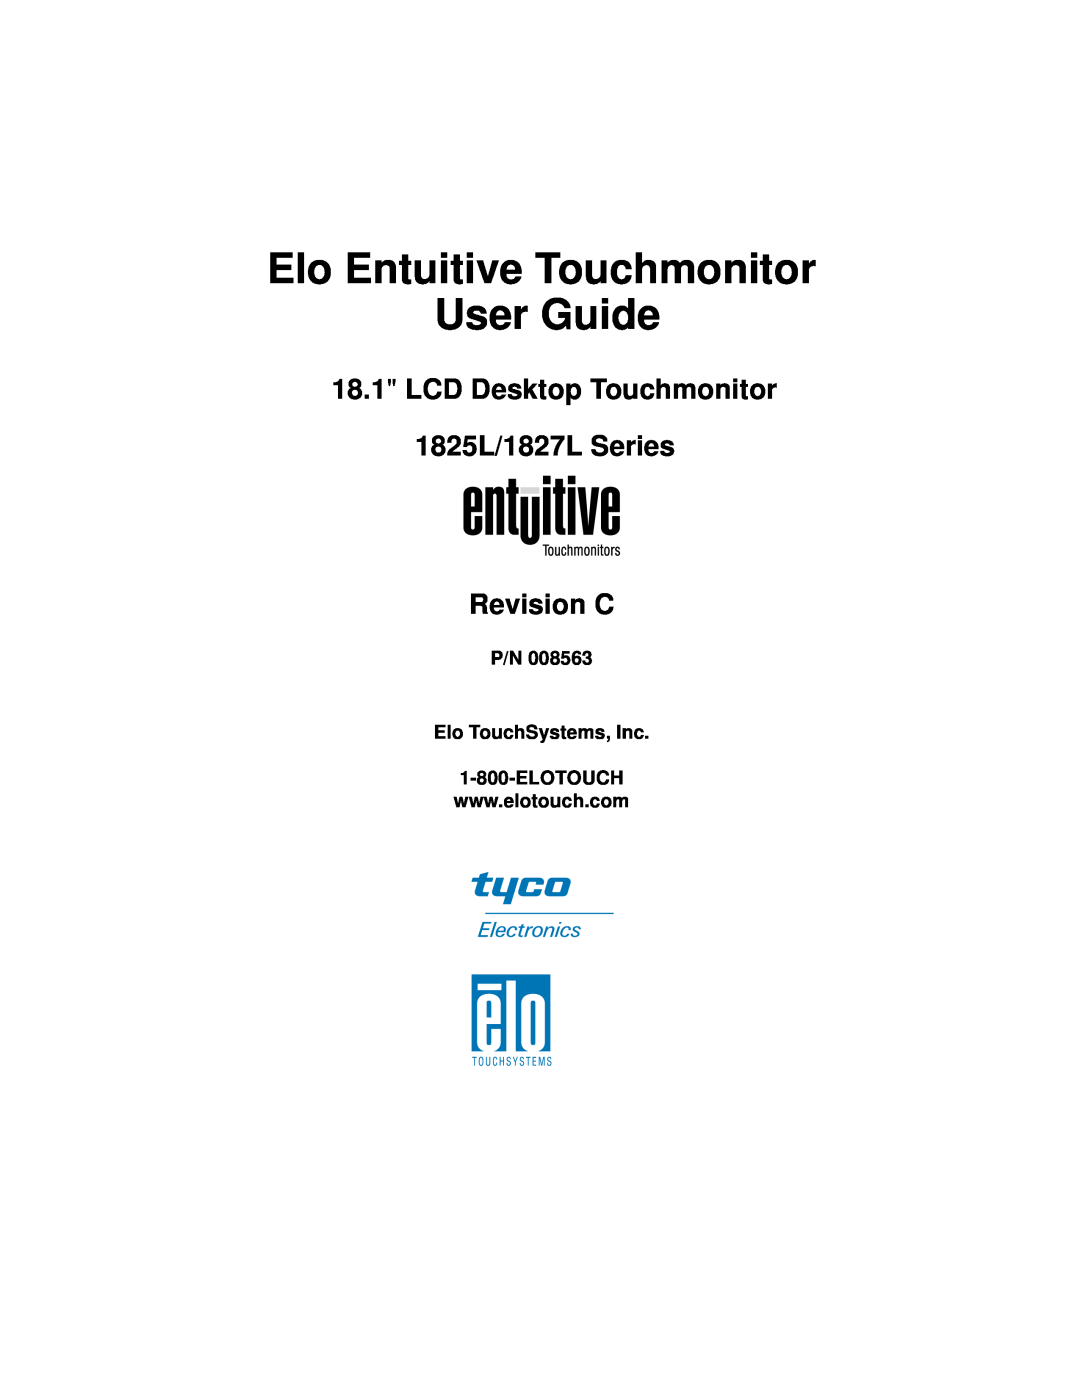 Elo TouchSystems manual Elo Entuitive Touchmonitor User Guide, LCD Desktop Touchmonitor 1825L/1827L Series Revision C 